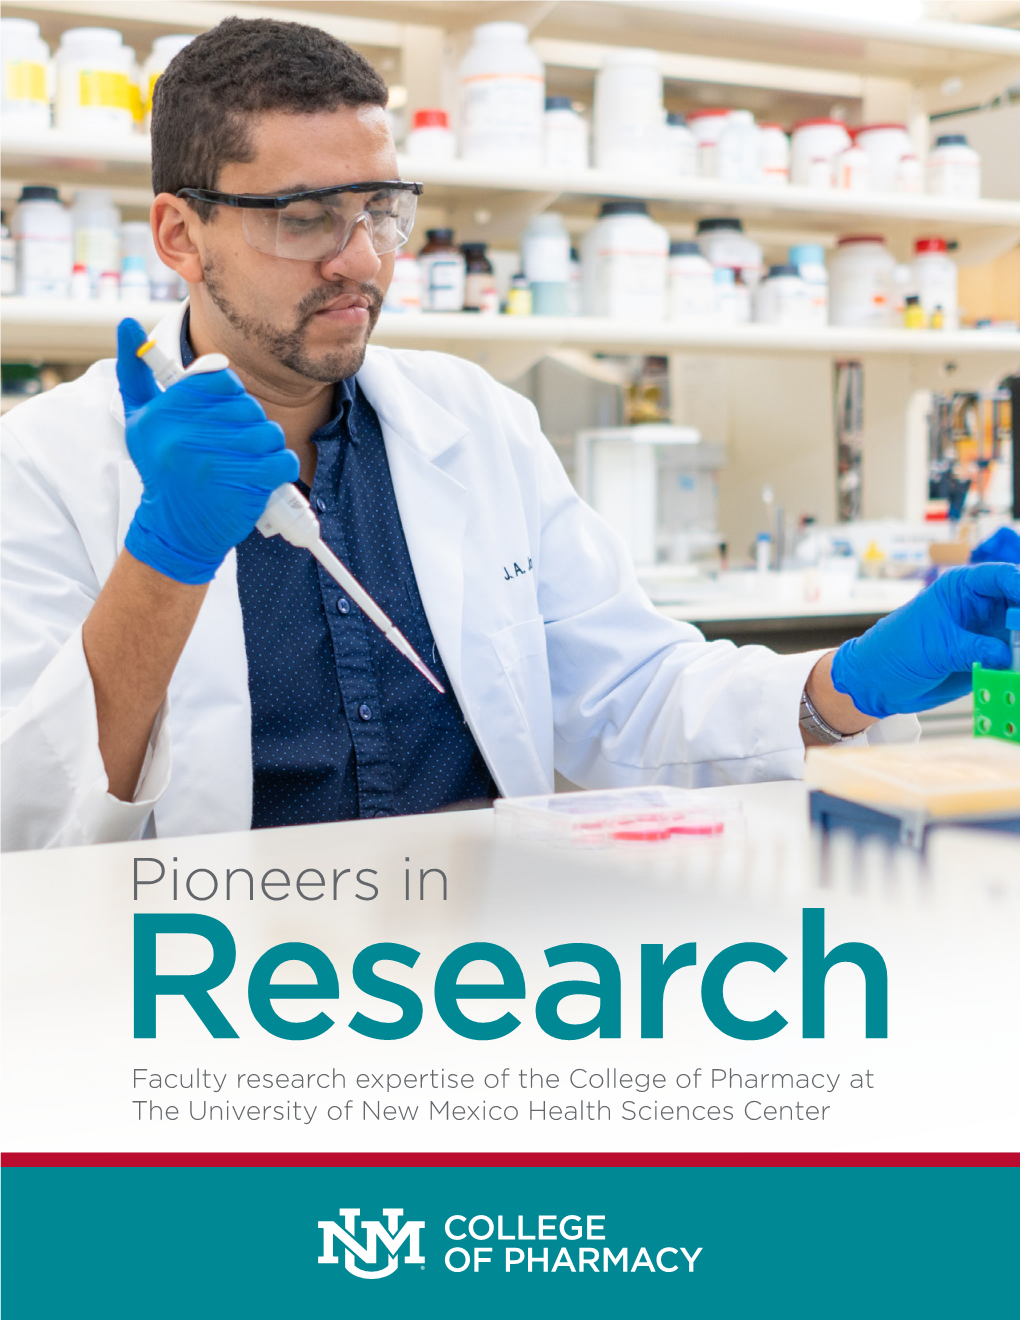 Faculty Research Expertise of the College of Pharmacy at the University of New Mexico Health Sciences Center Vision, Mission & Values Contents